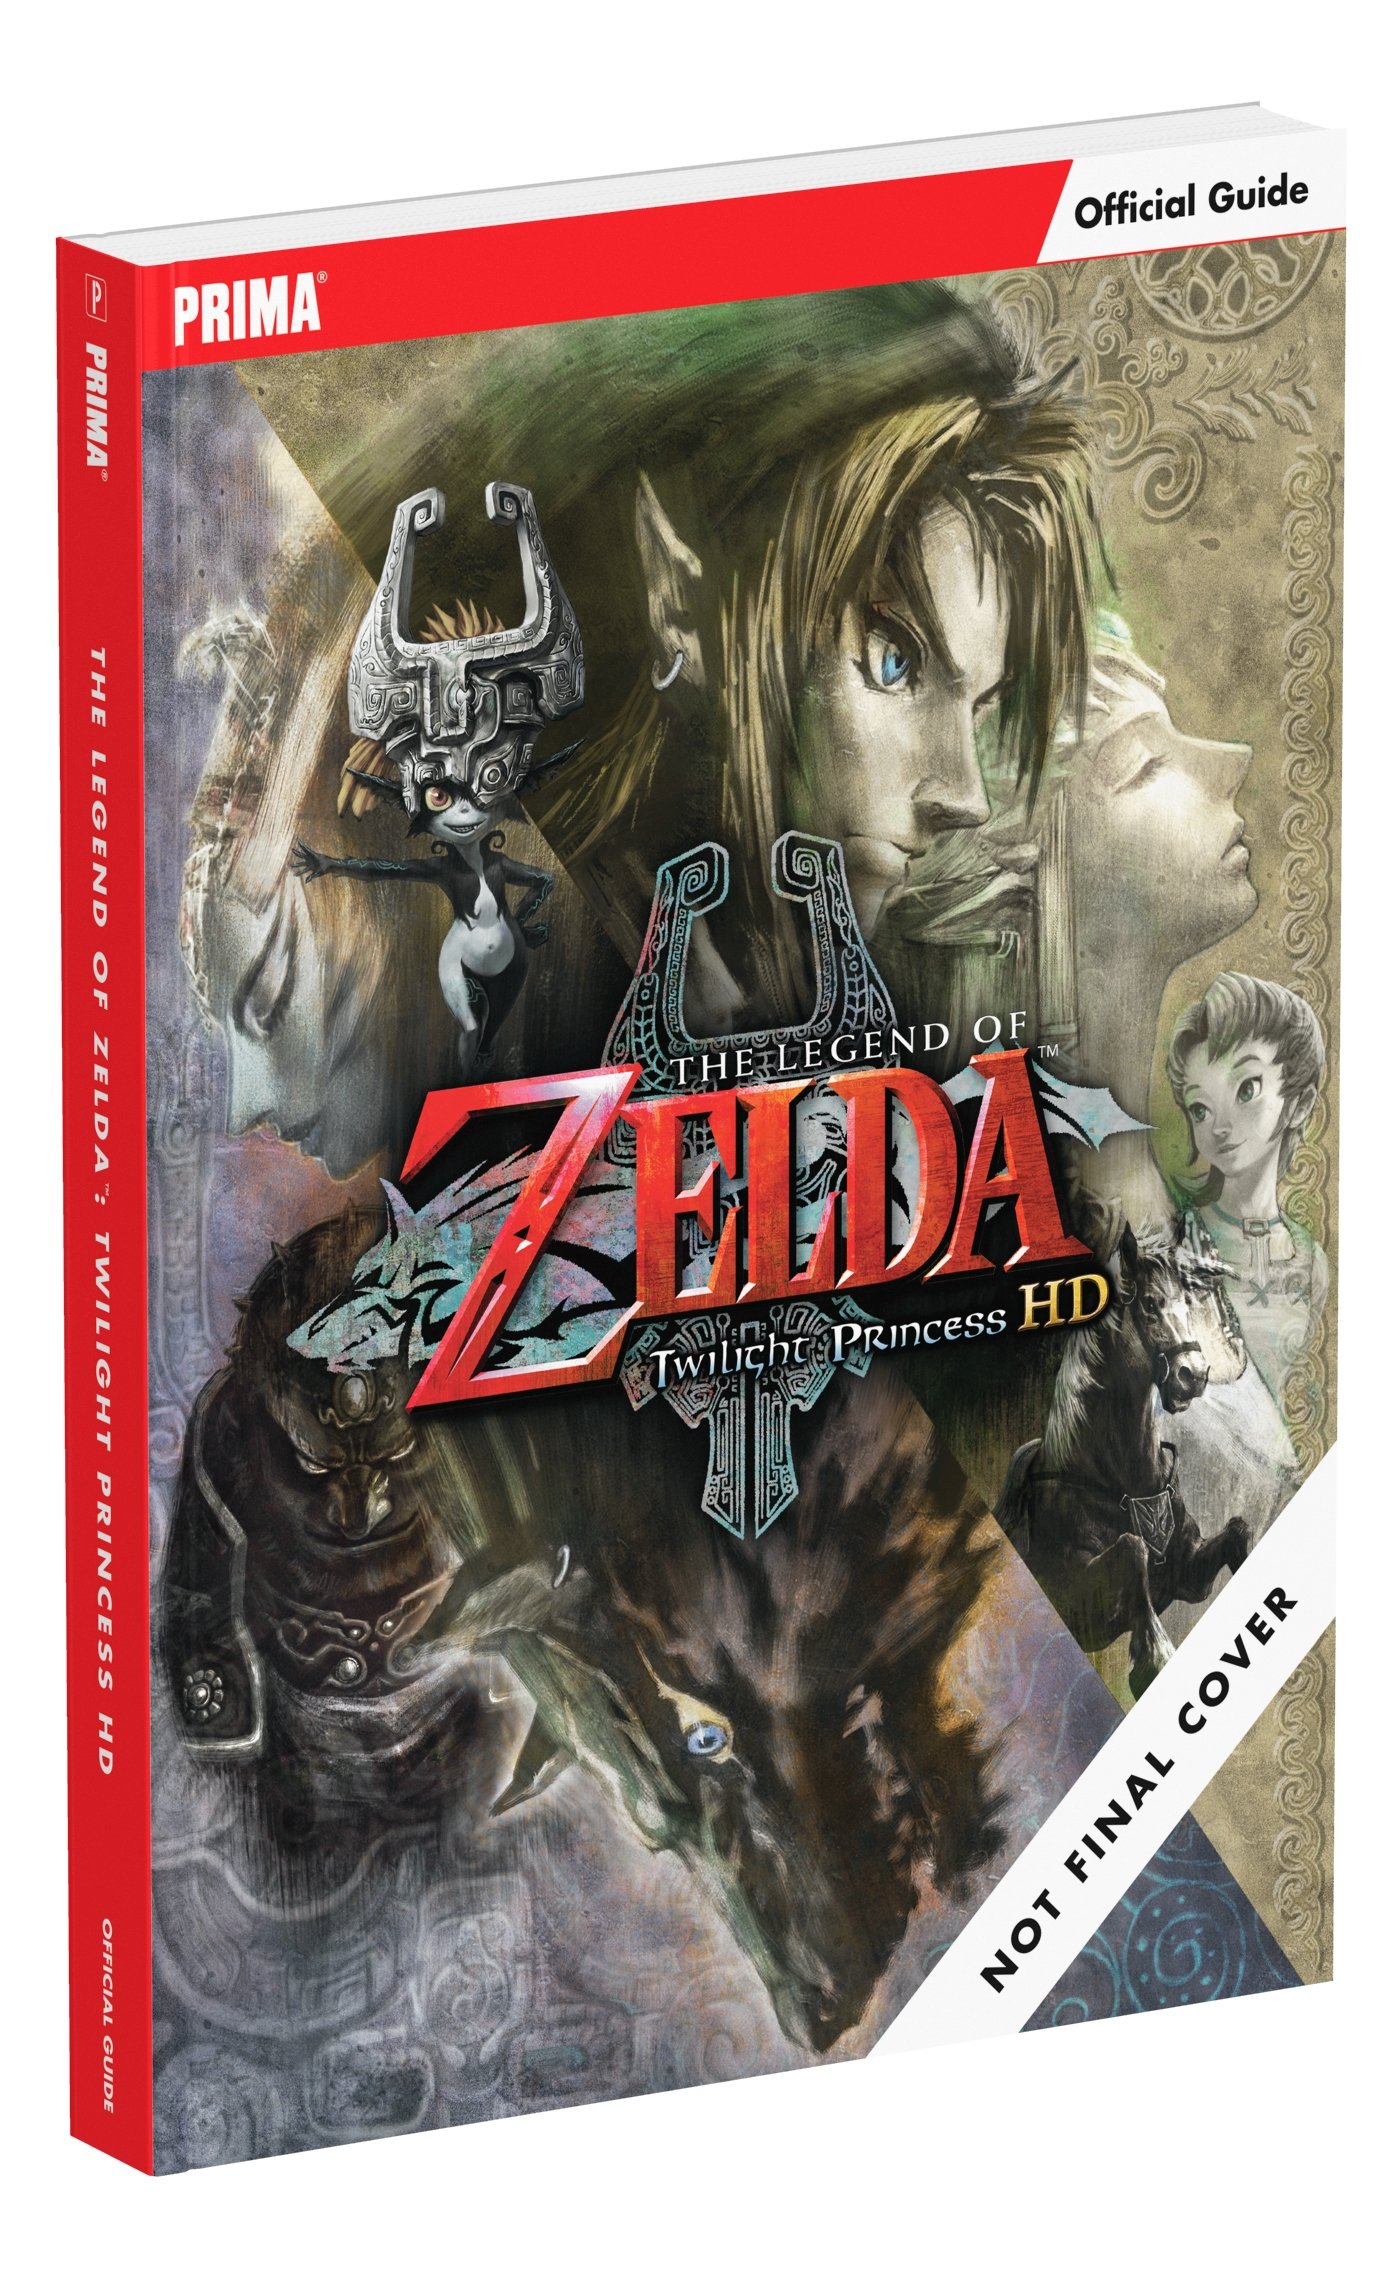 http://www.perfectly-nintendo.com/wp-content/gallery/twilight-princess-hd-guide-17-01-2016/1.jpg